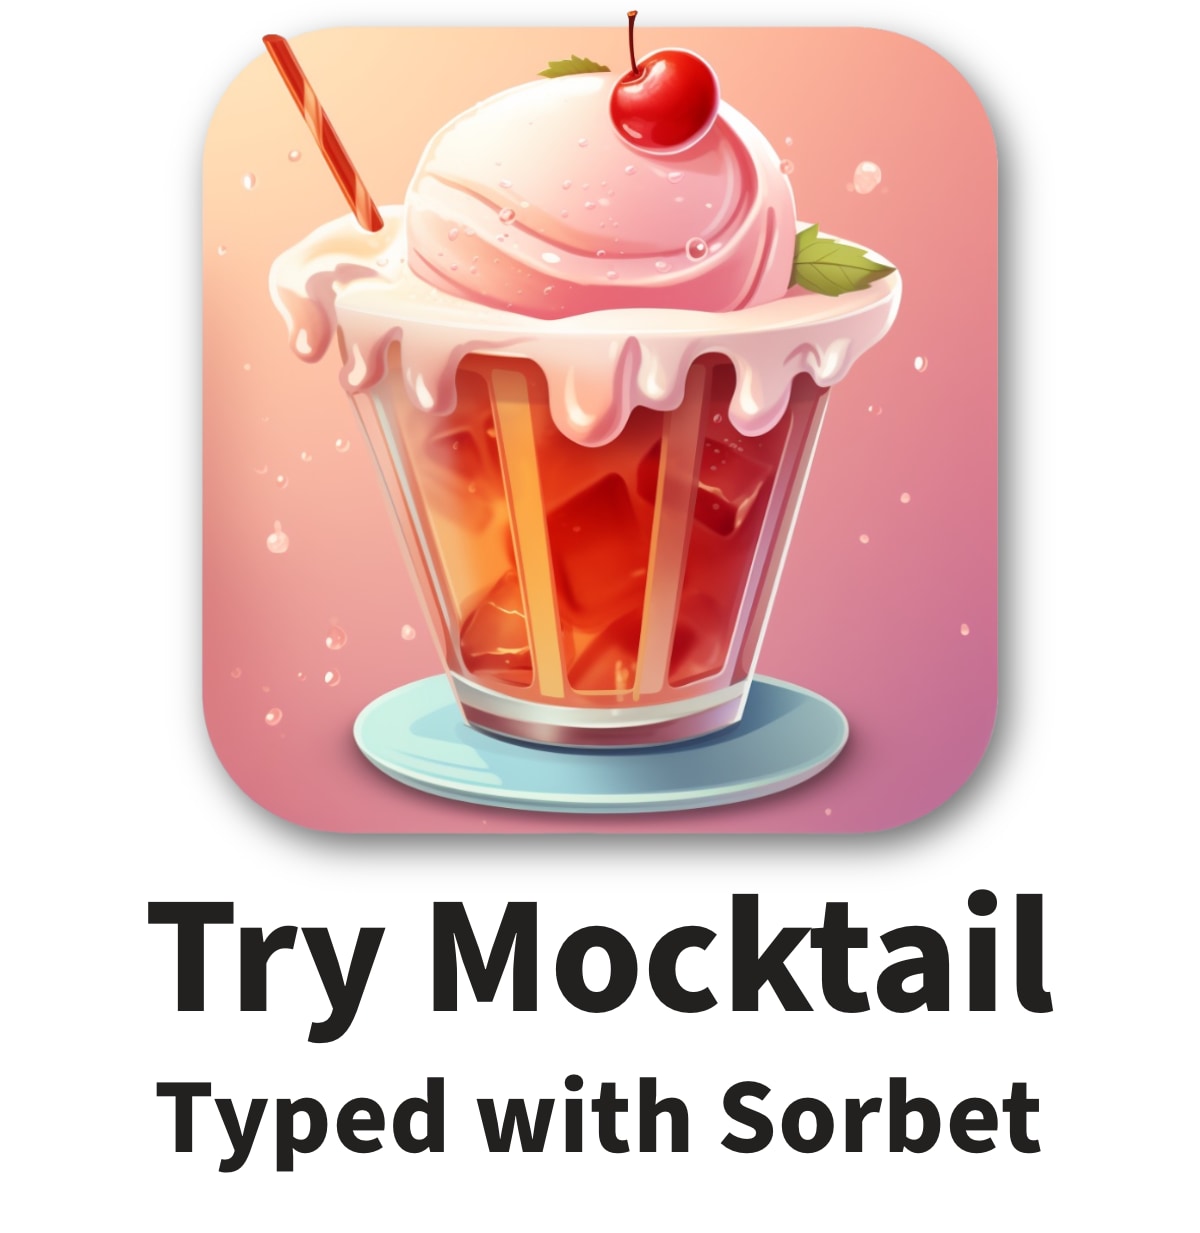 Try Mocktail with Sorbet type checking